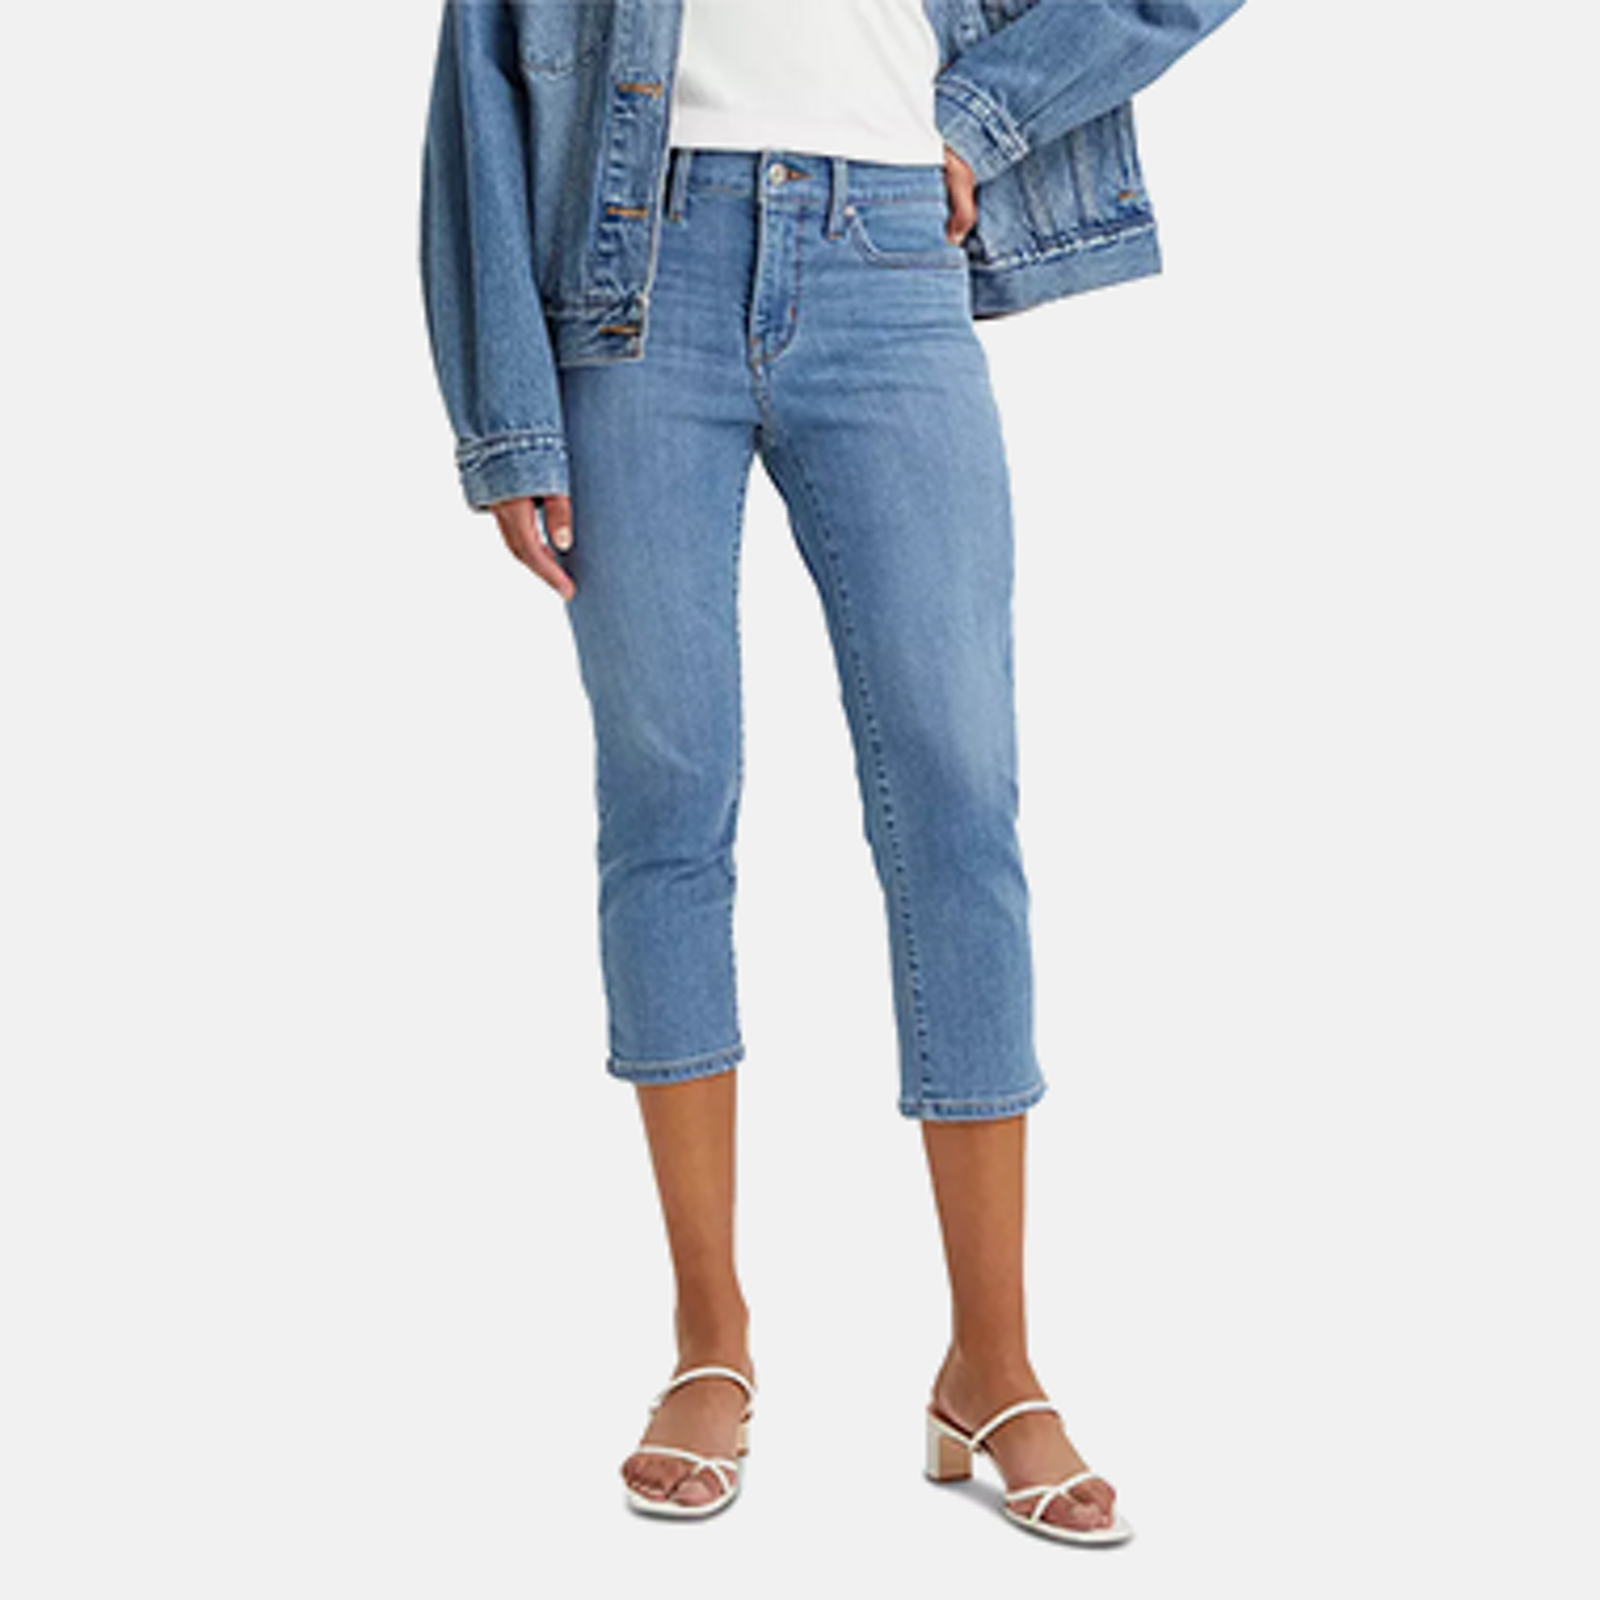 macys dkny jeans - OFF-64% >Free Delivery